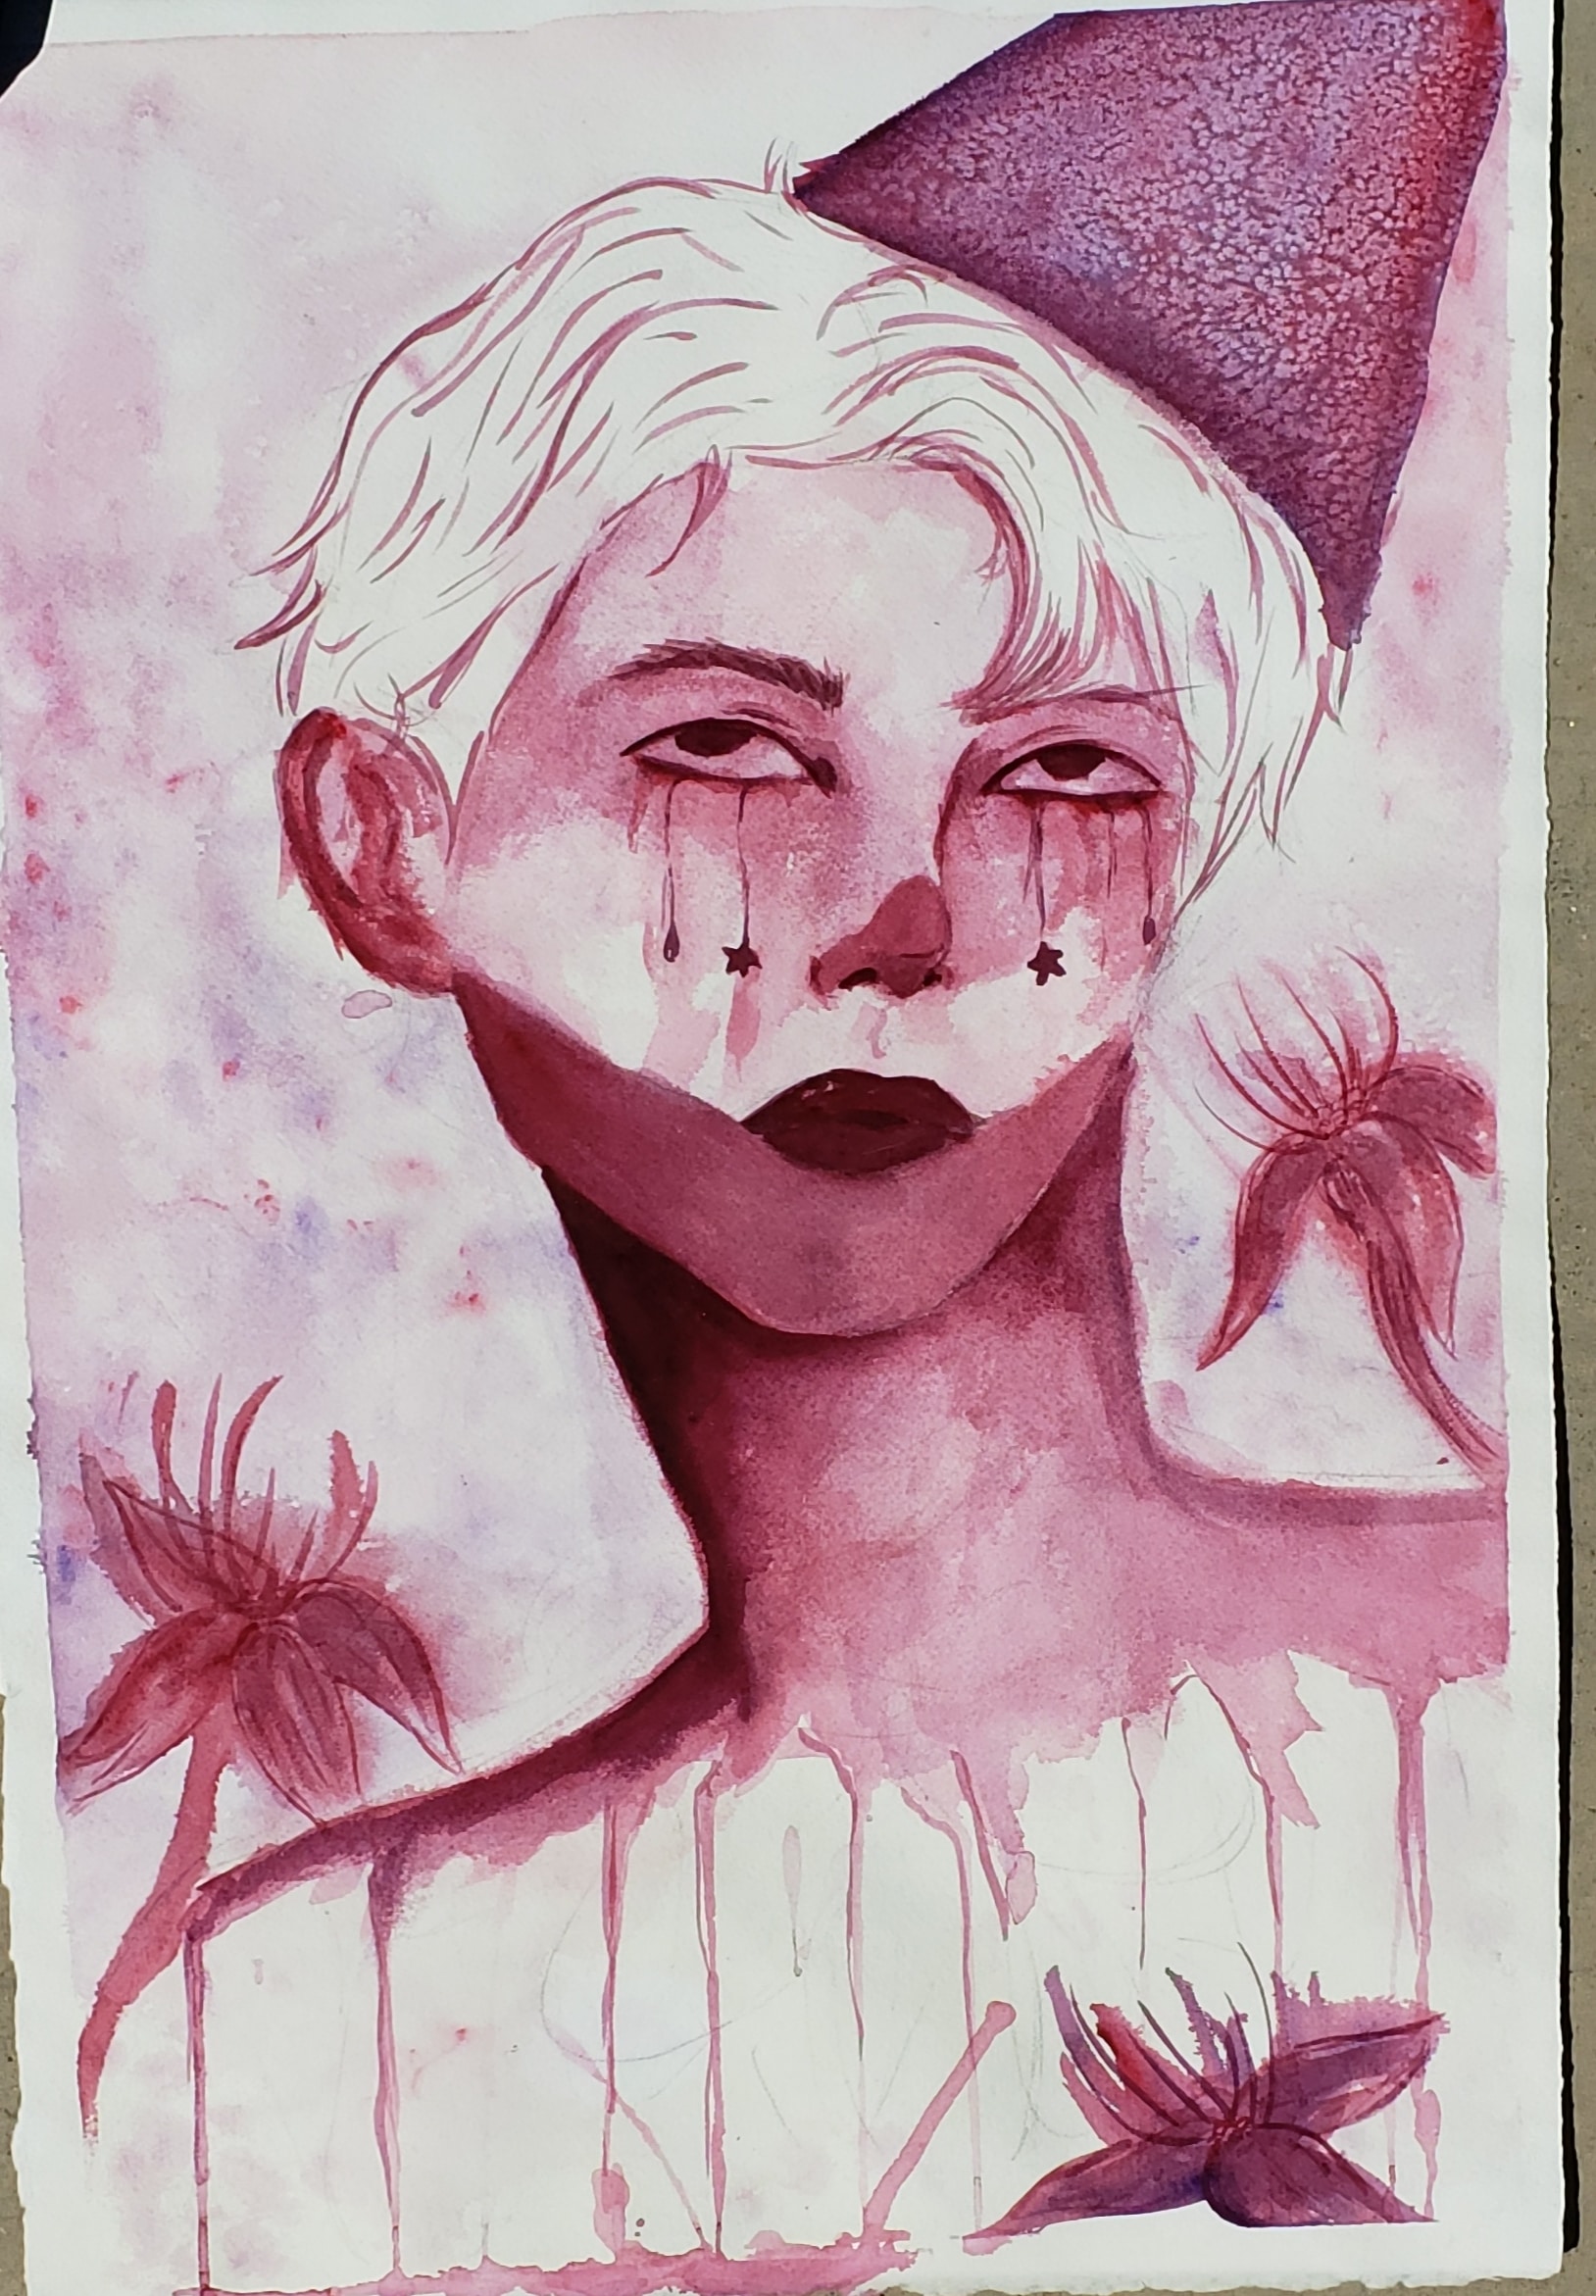 photo illistration of a painting - Clownery, Adrianna Vasquez Melero. 2020. Watercolor. Image courtesy of the Artist.